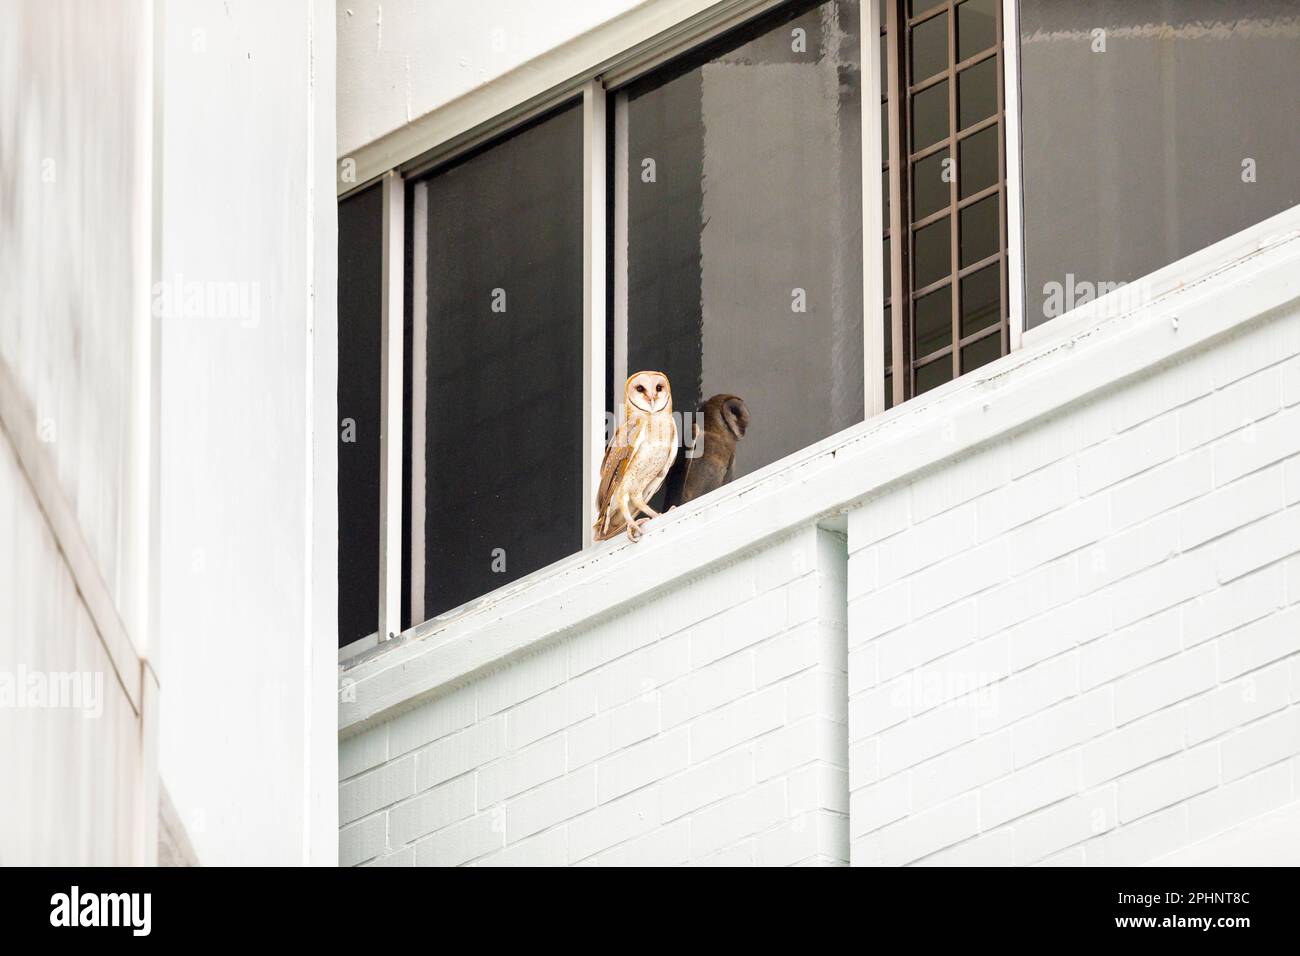 A barn owl, a rare sight in Singapore, perches on the window ledge of an apartment block in a public housing estate after being disturbed by hornbills Stock Photo